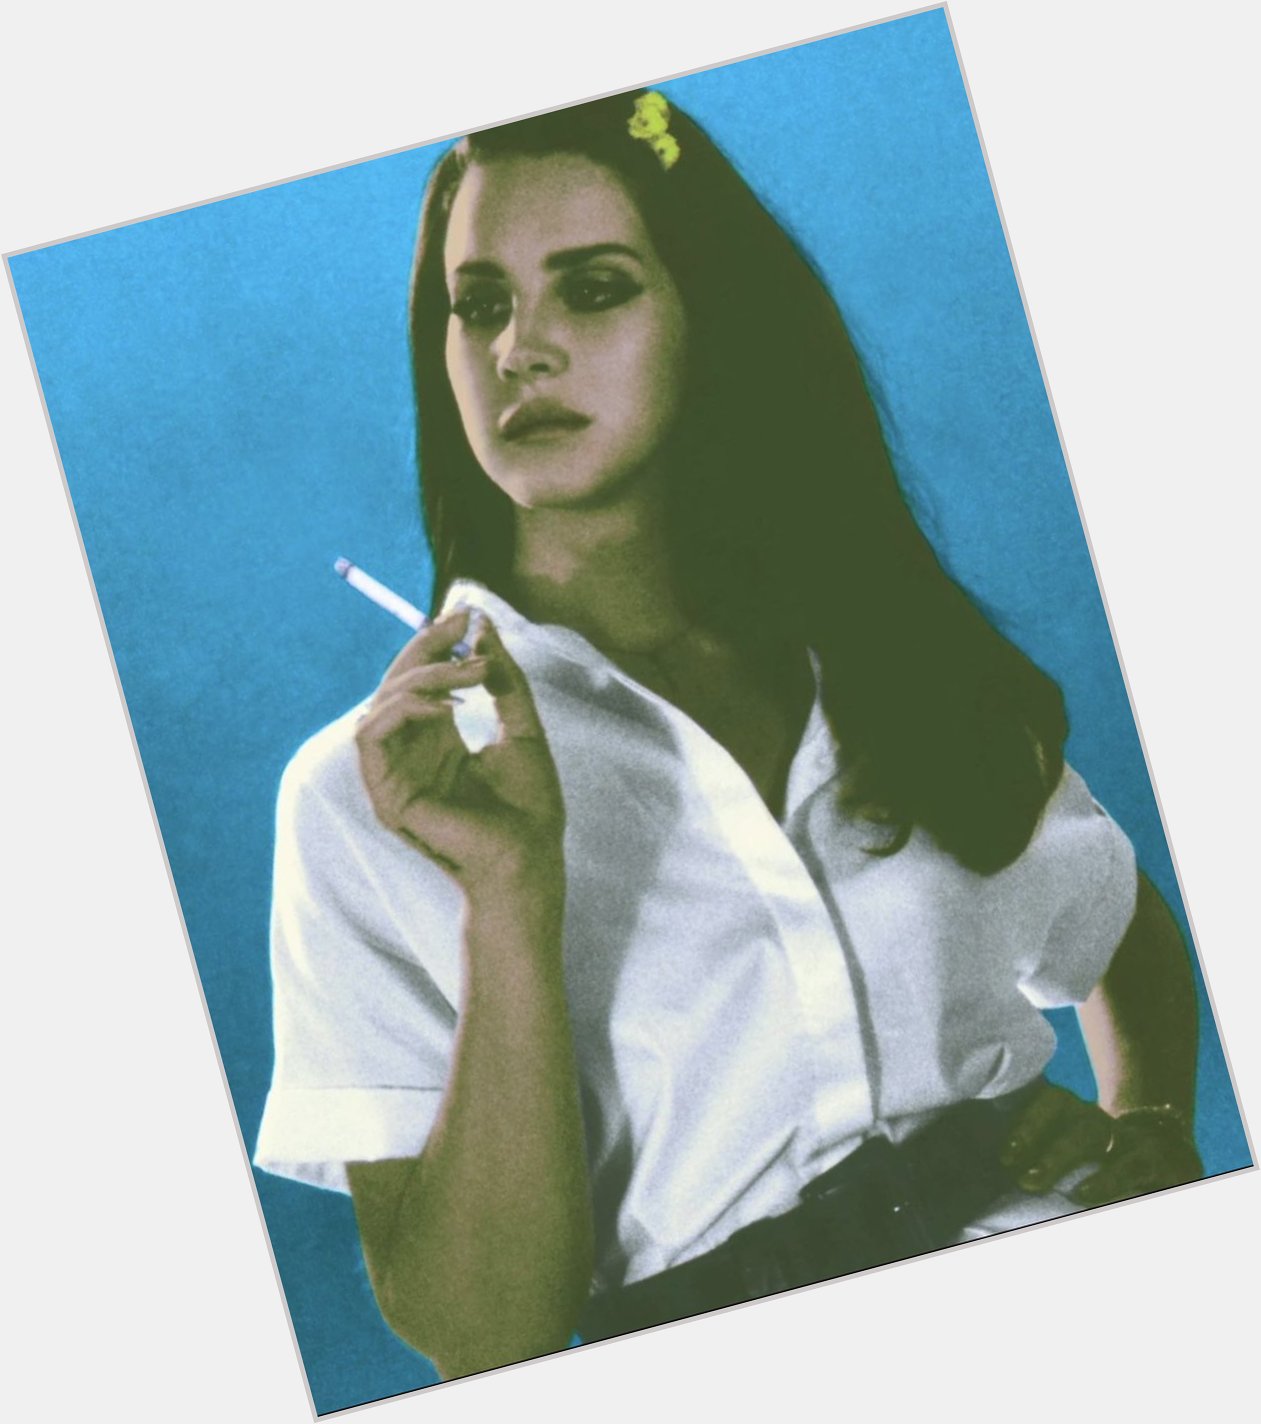 Happy birthday to 2023 festival headliner Lana Del Rey. forever iconic. forever Young and Beautiful 